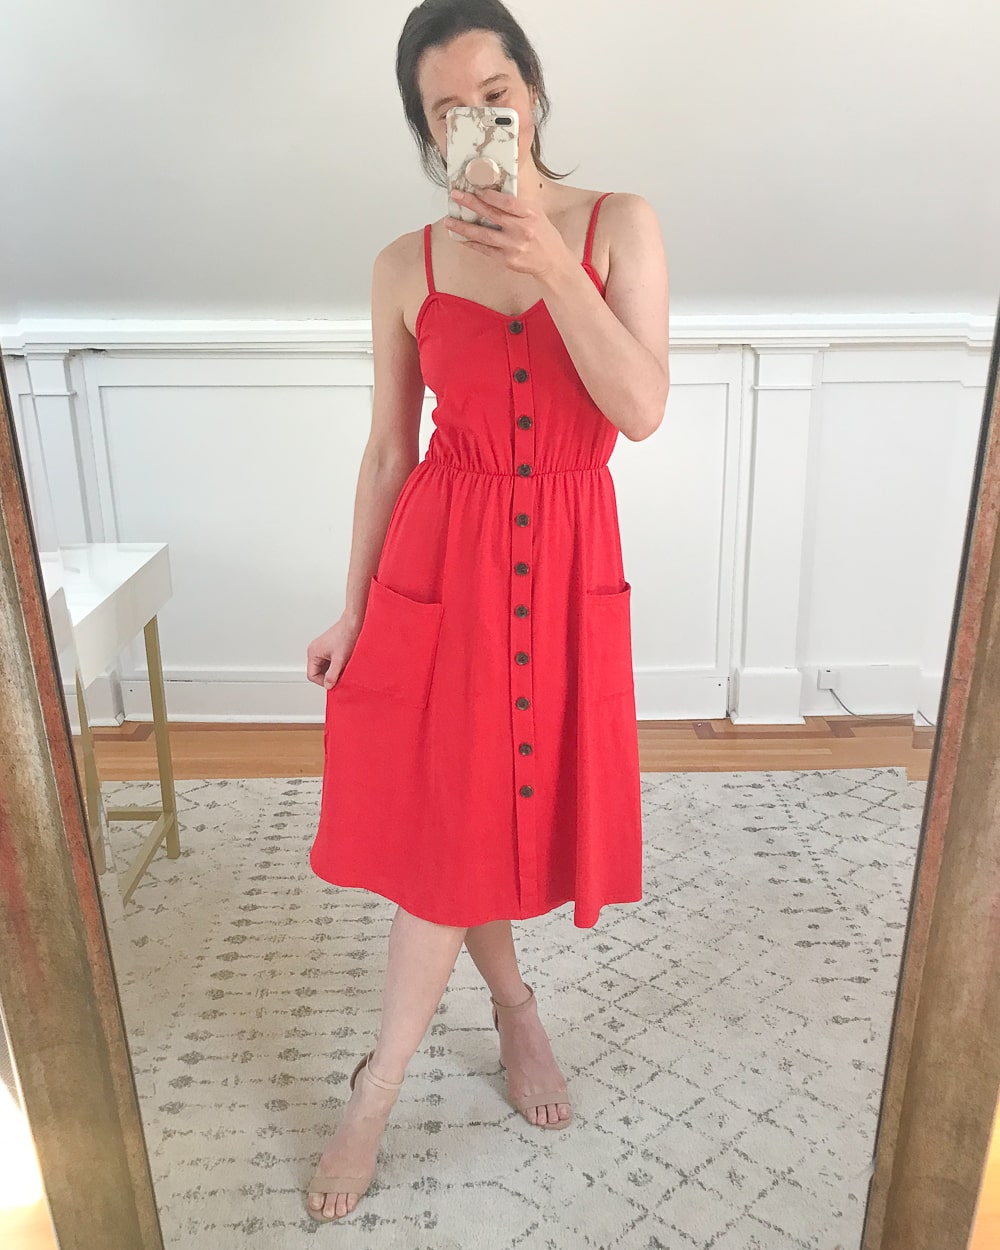 Amazon red 4th of July midi dress tried on by affordable fashion blogger Stephanie Ziajka on Diary of a Debutante